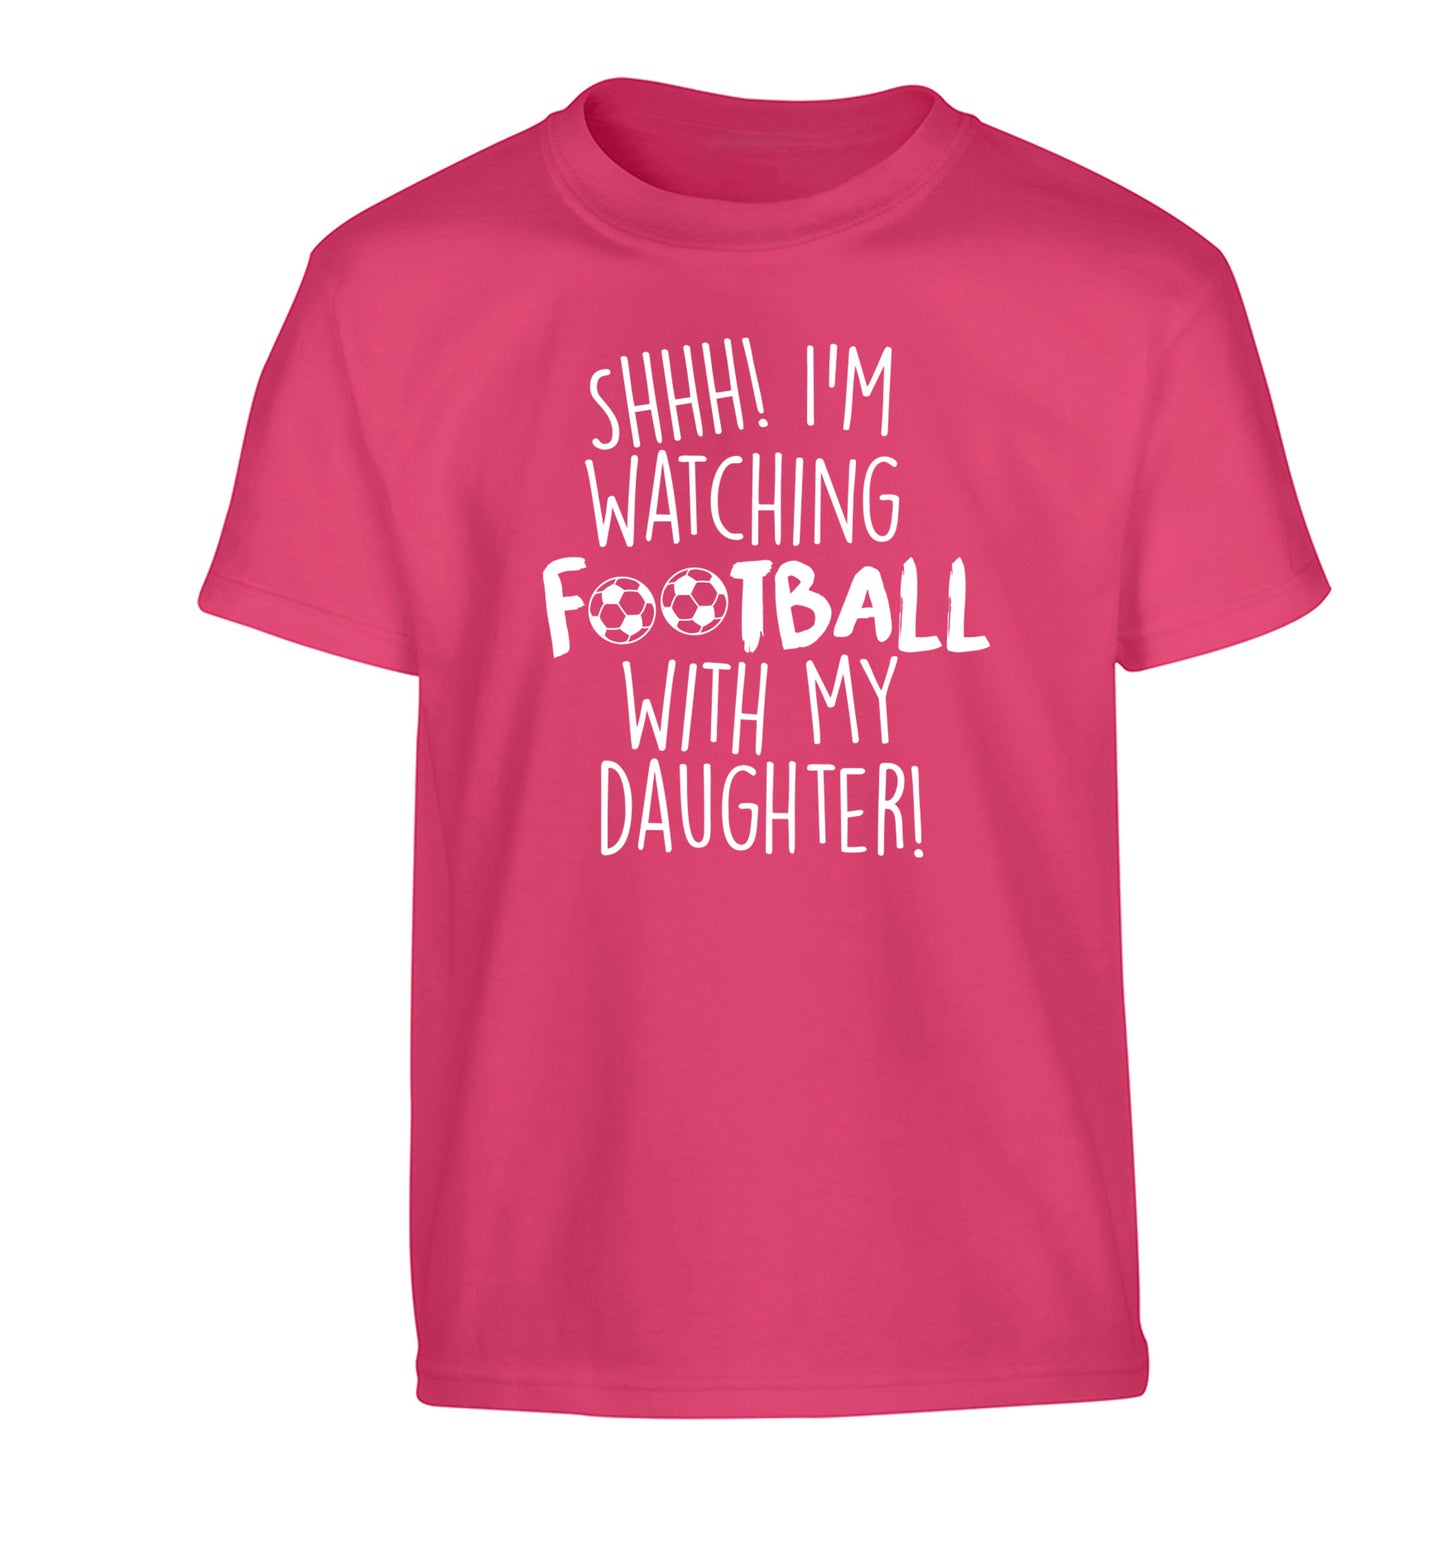 Shhh I'm watching football with my daughter Children's pink Tshirt 12-14 Years